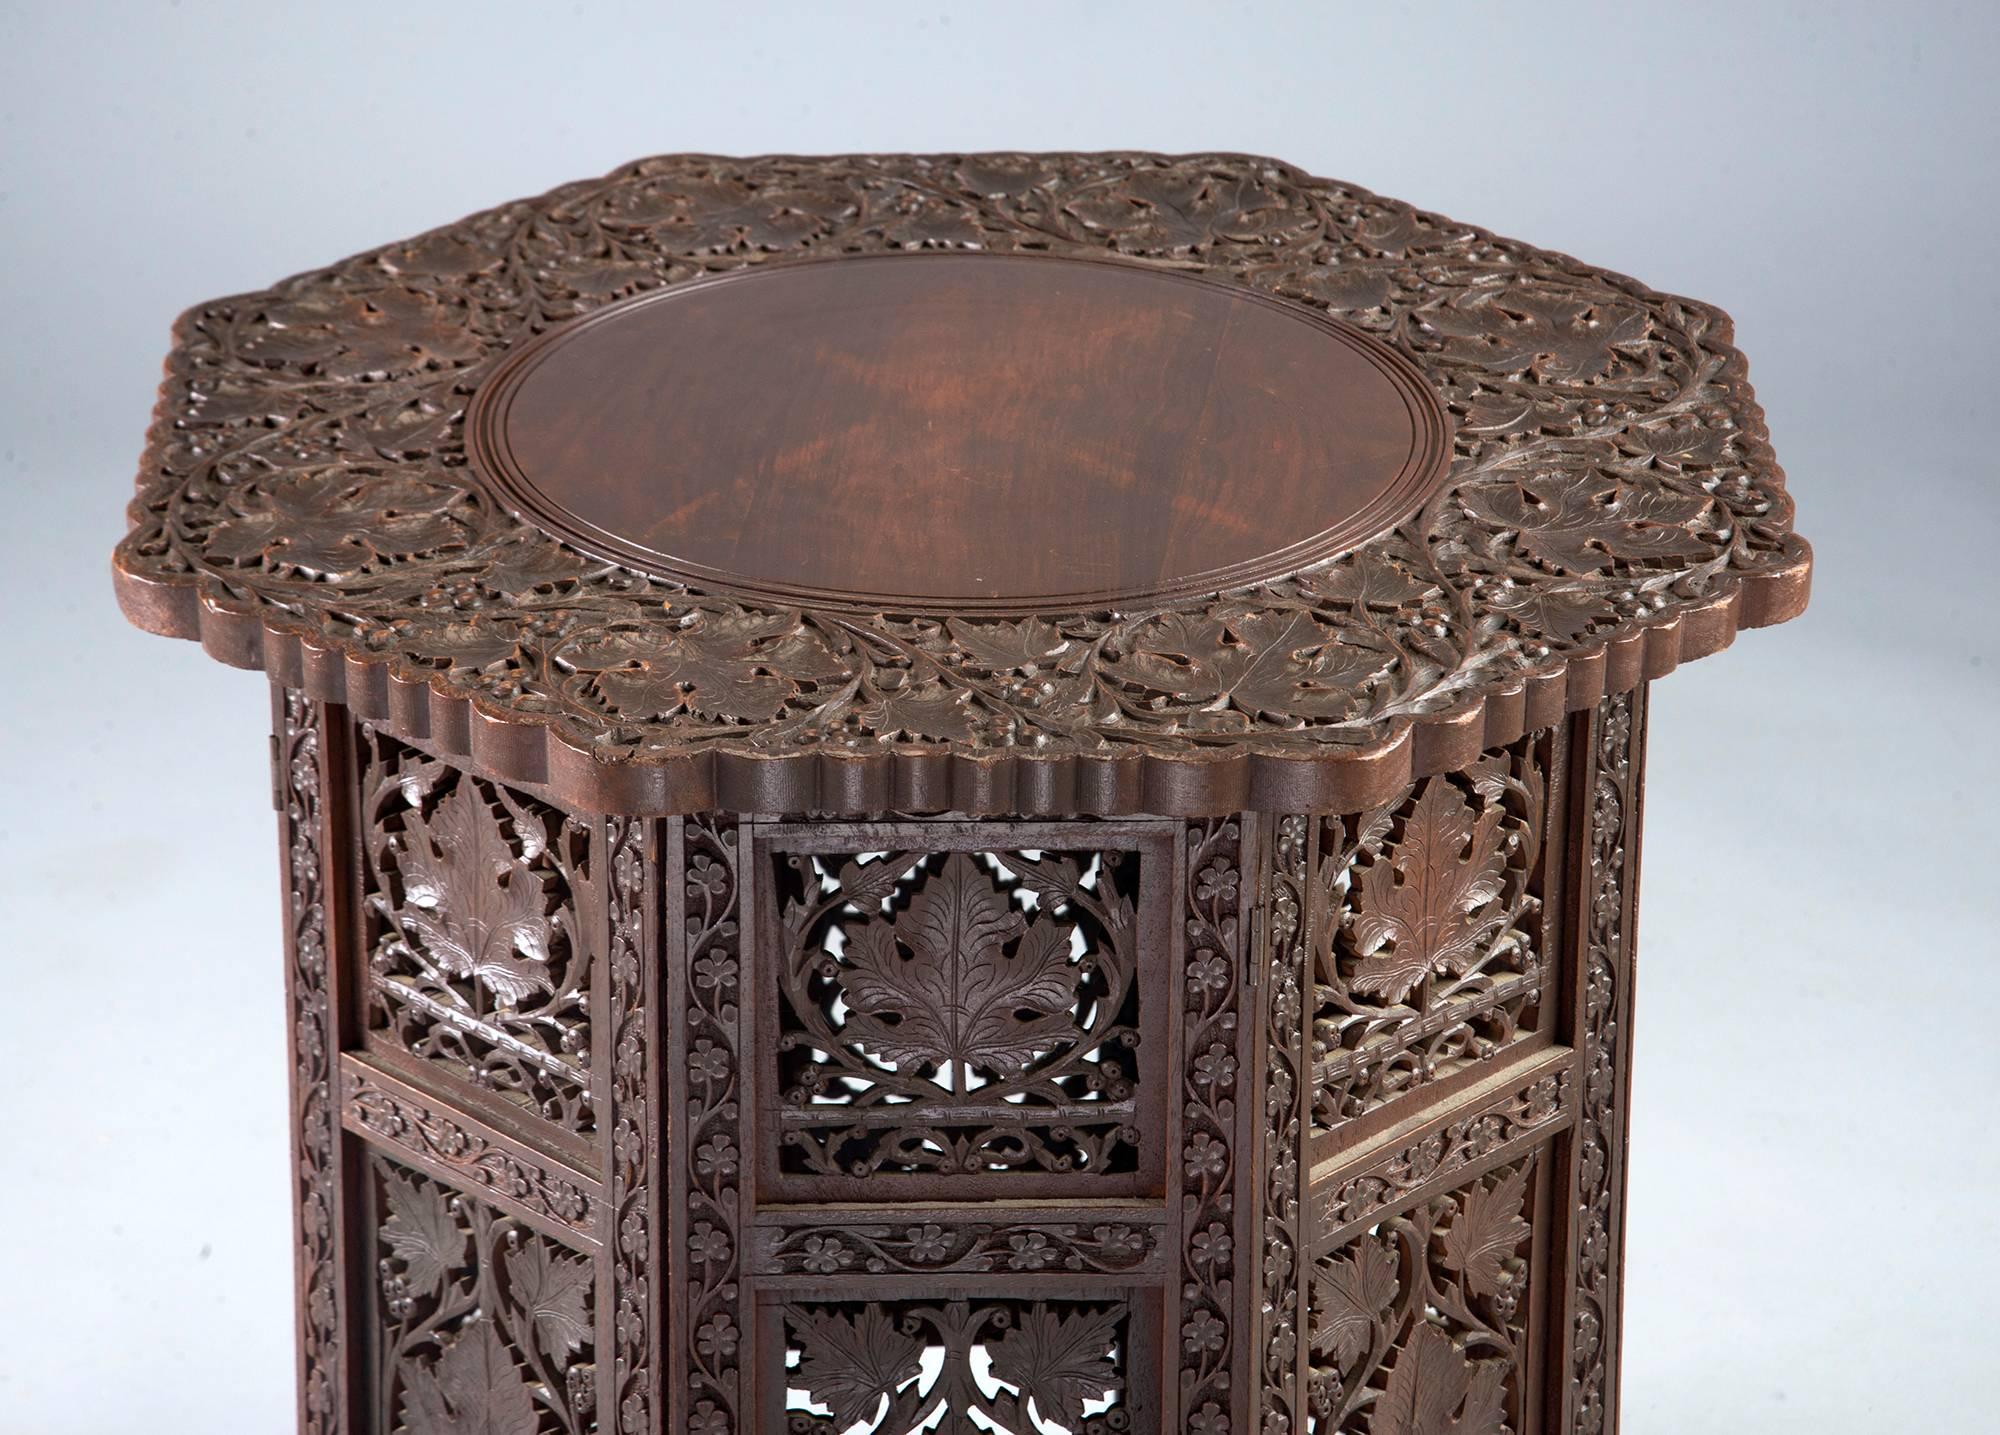 Small Moorish style table has eight-sided base with intricate, open work carved grapes, vines and leaves, Eight-sided table top is removable and base folds flat for easy shipping.